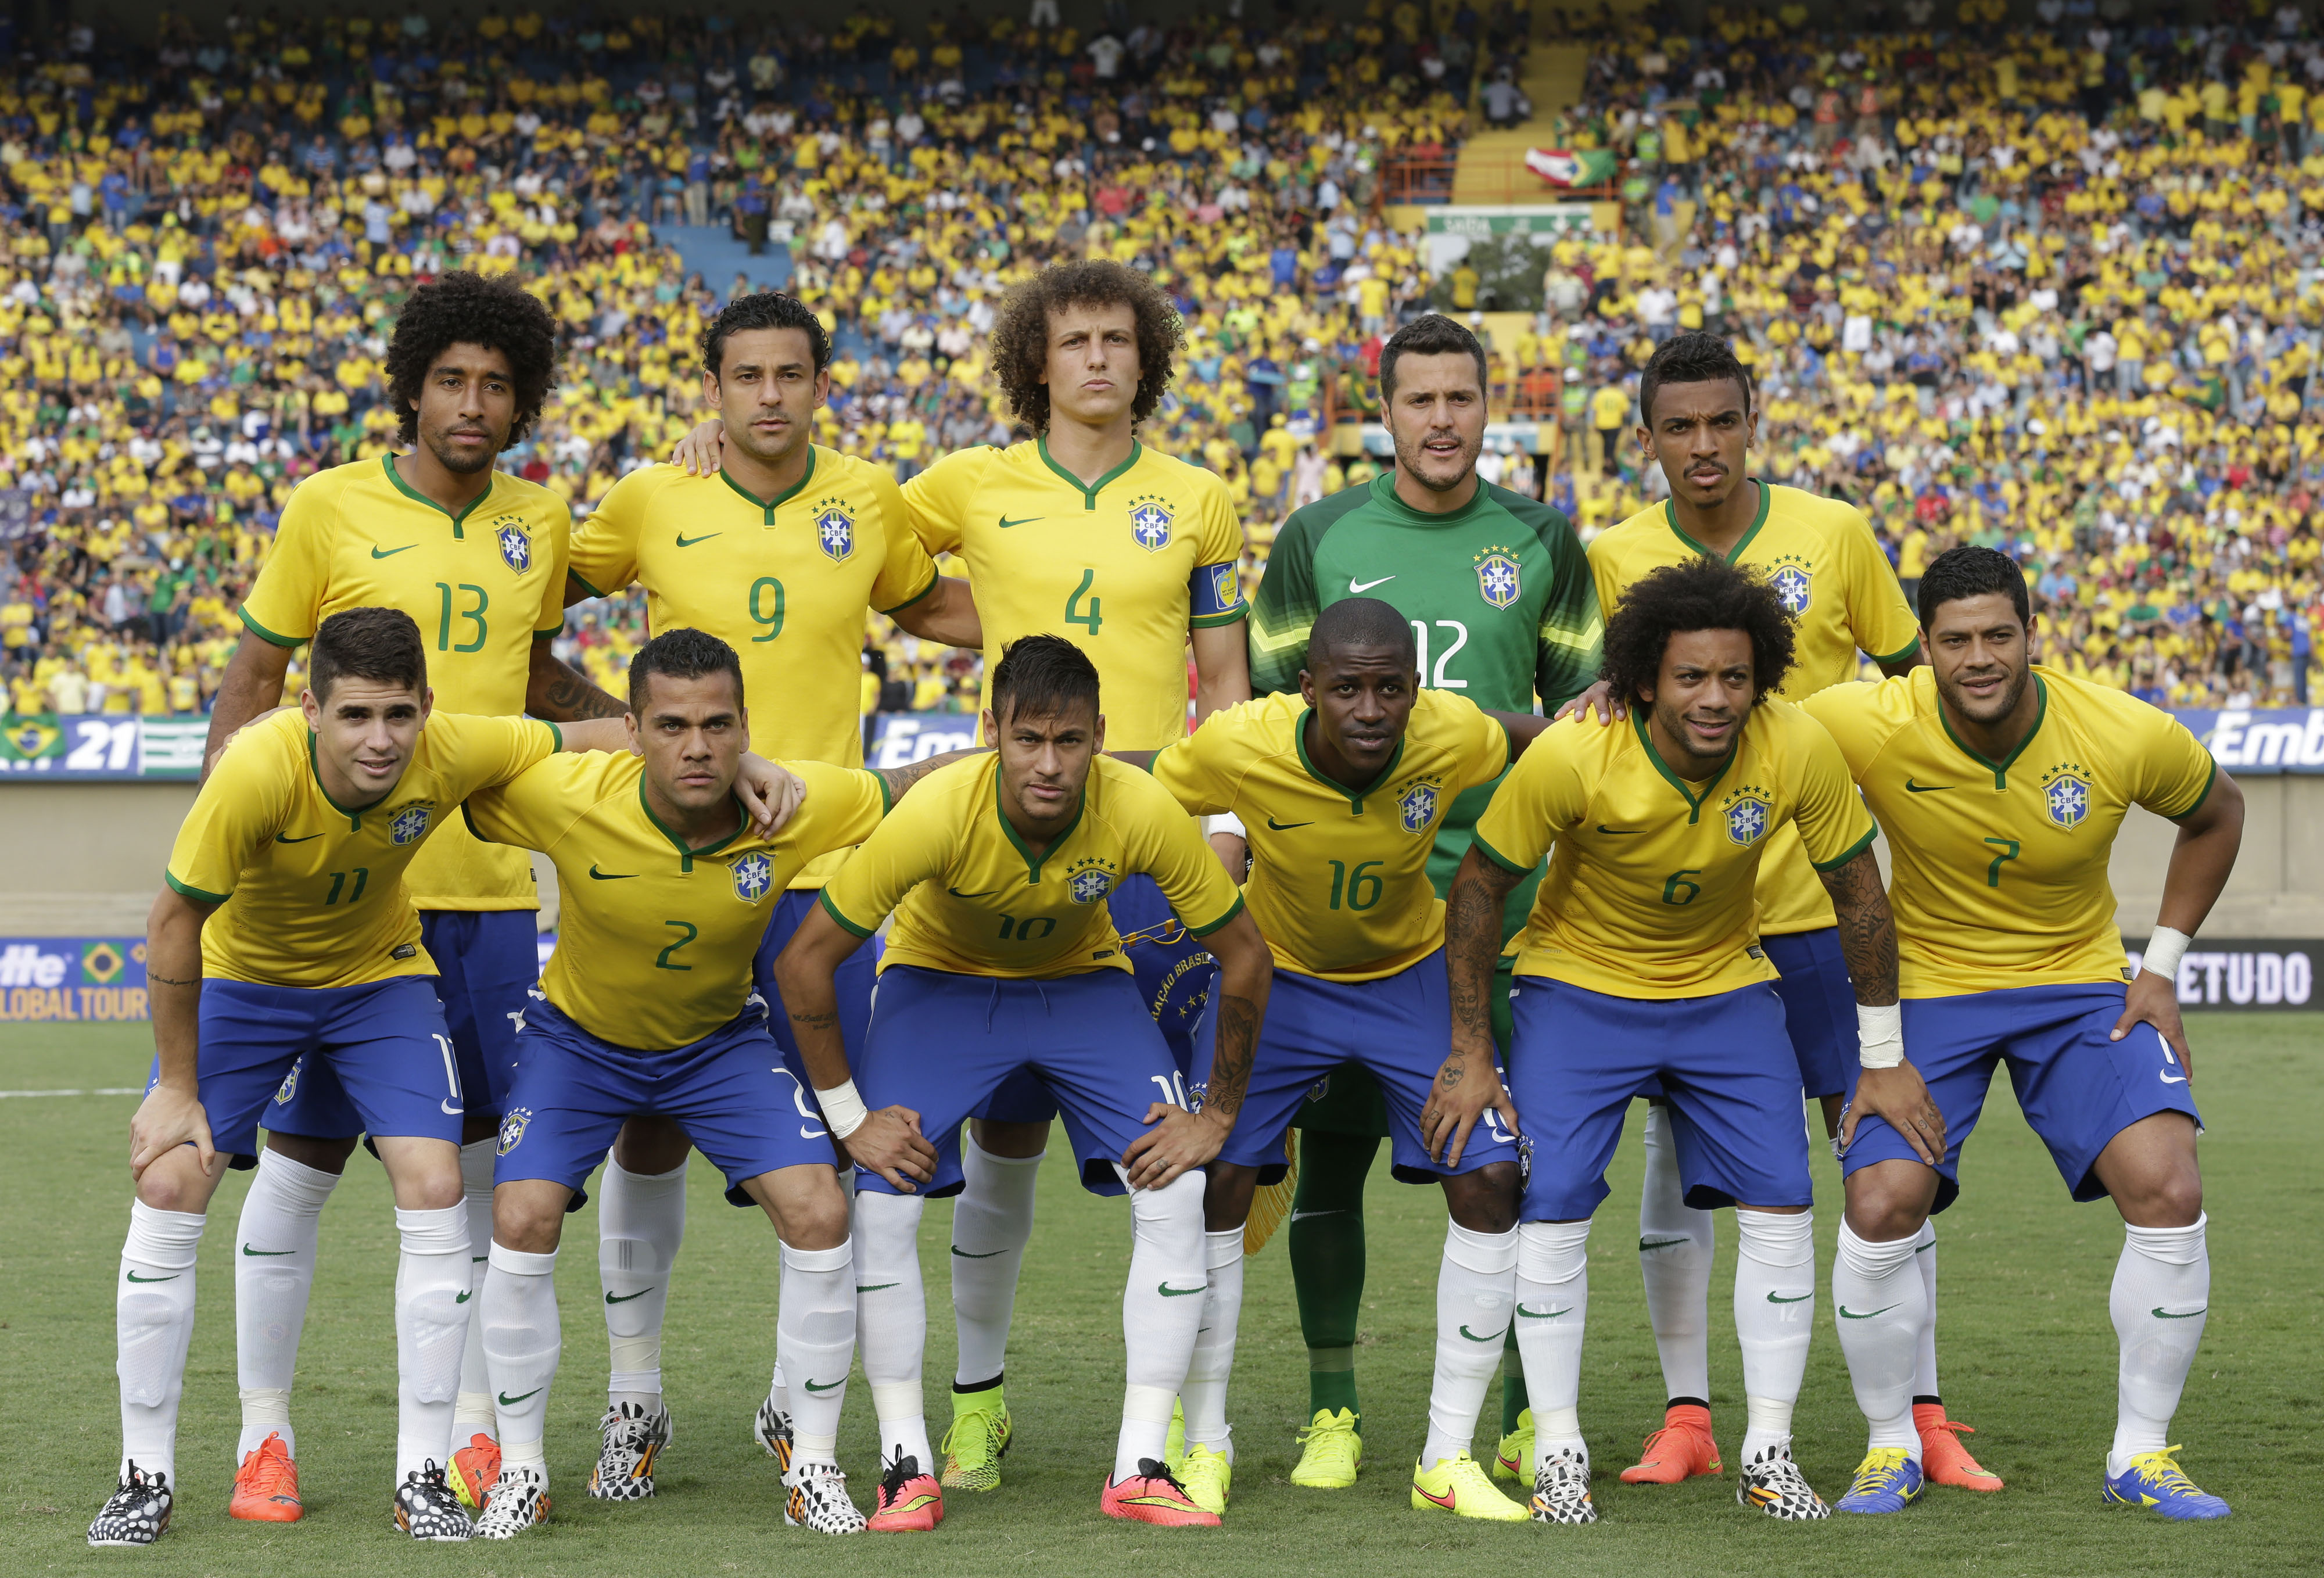 Brazilian national team brings in 13 new players after disastrous World Cup